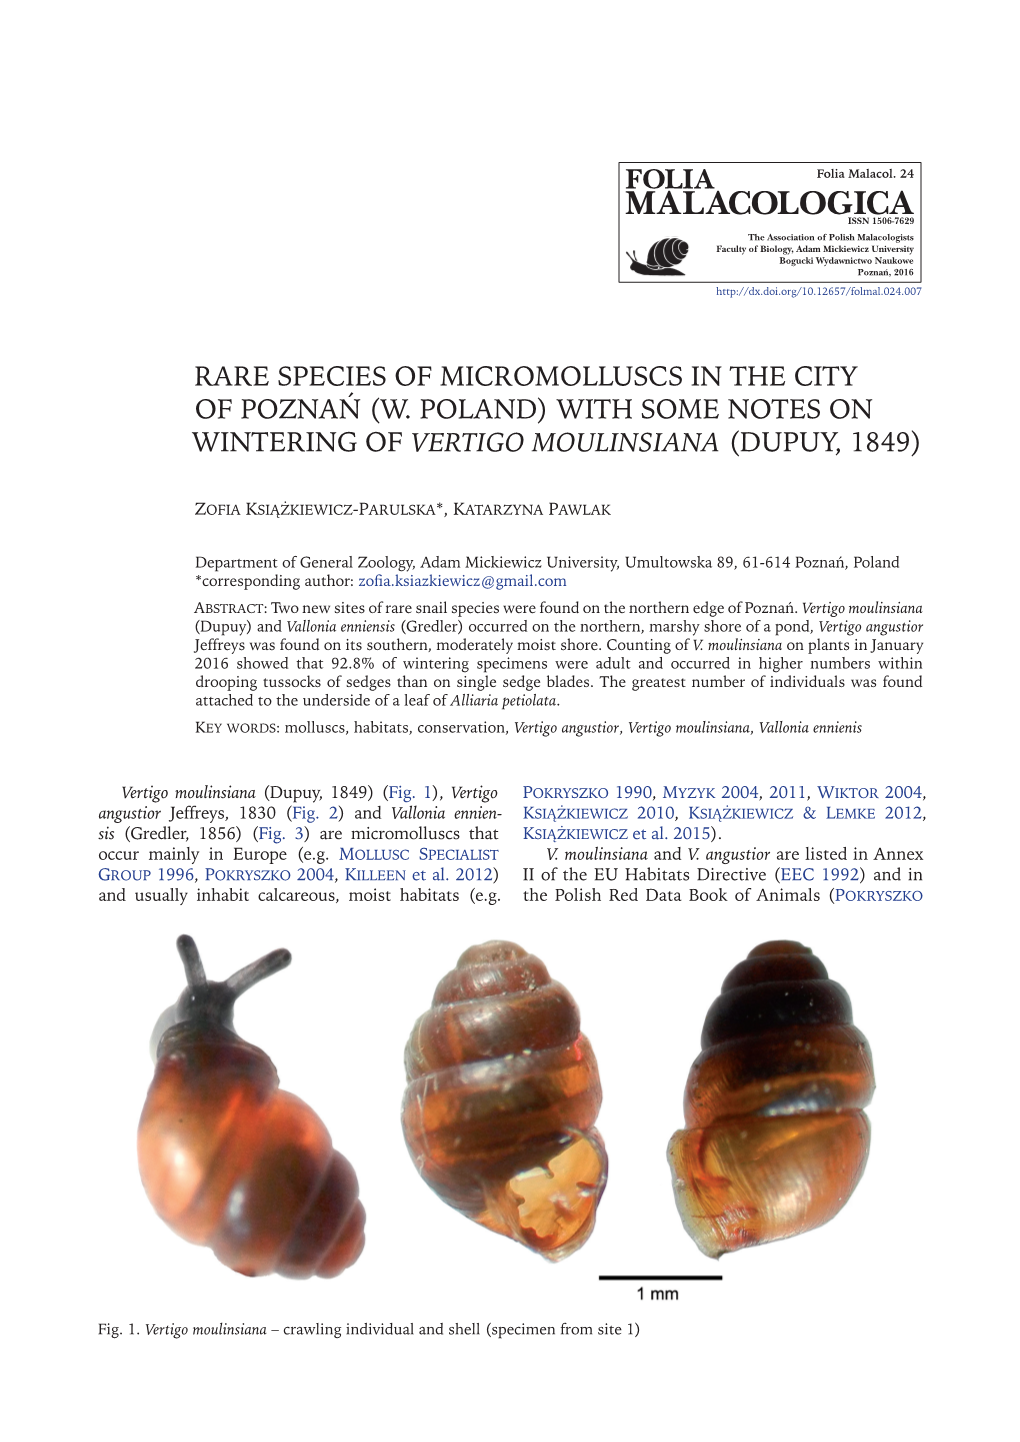 Rare Species of Micromolluscs in the City of Poznań (W. Poland) with Some Notes on Wintering of Vertigo Moulinsiana (Dupuy, 1849)